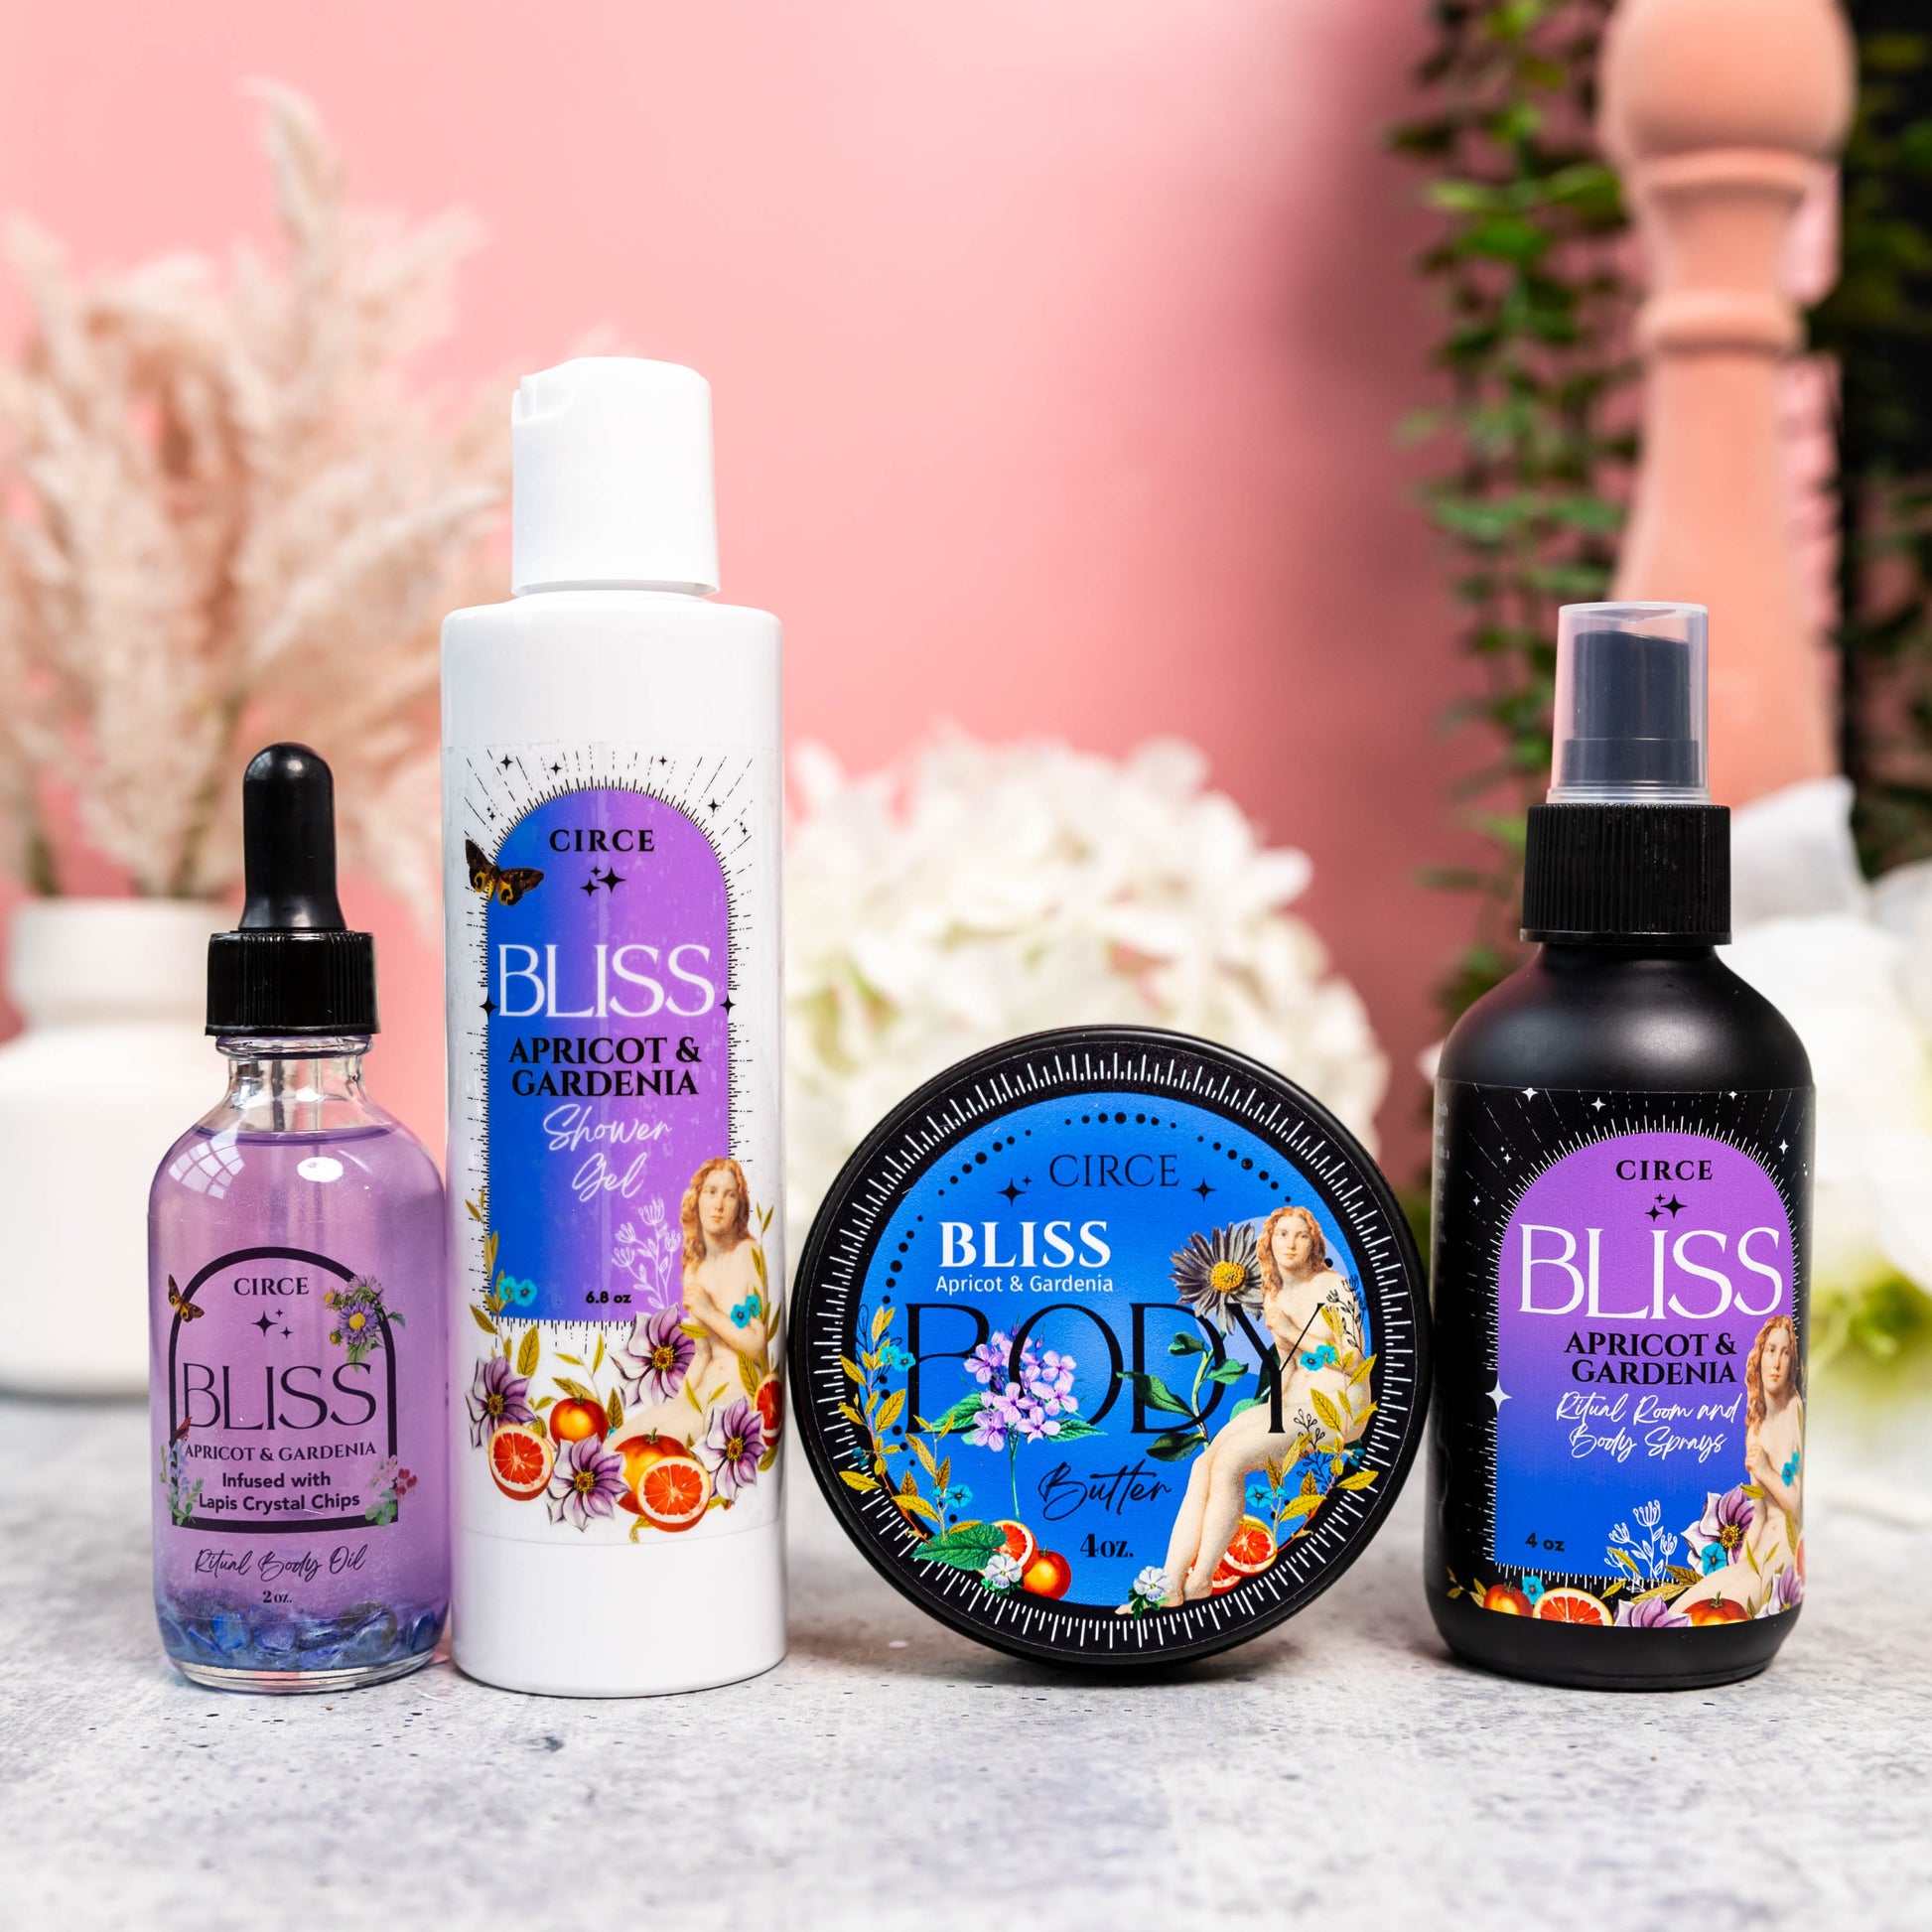 Bliss Ritual Room and Body Spray 4 oz.  from Circe Boutique